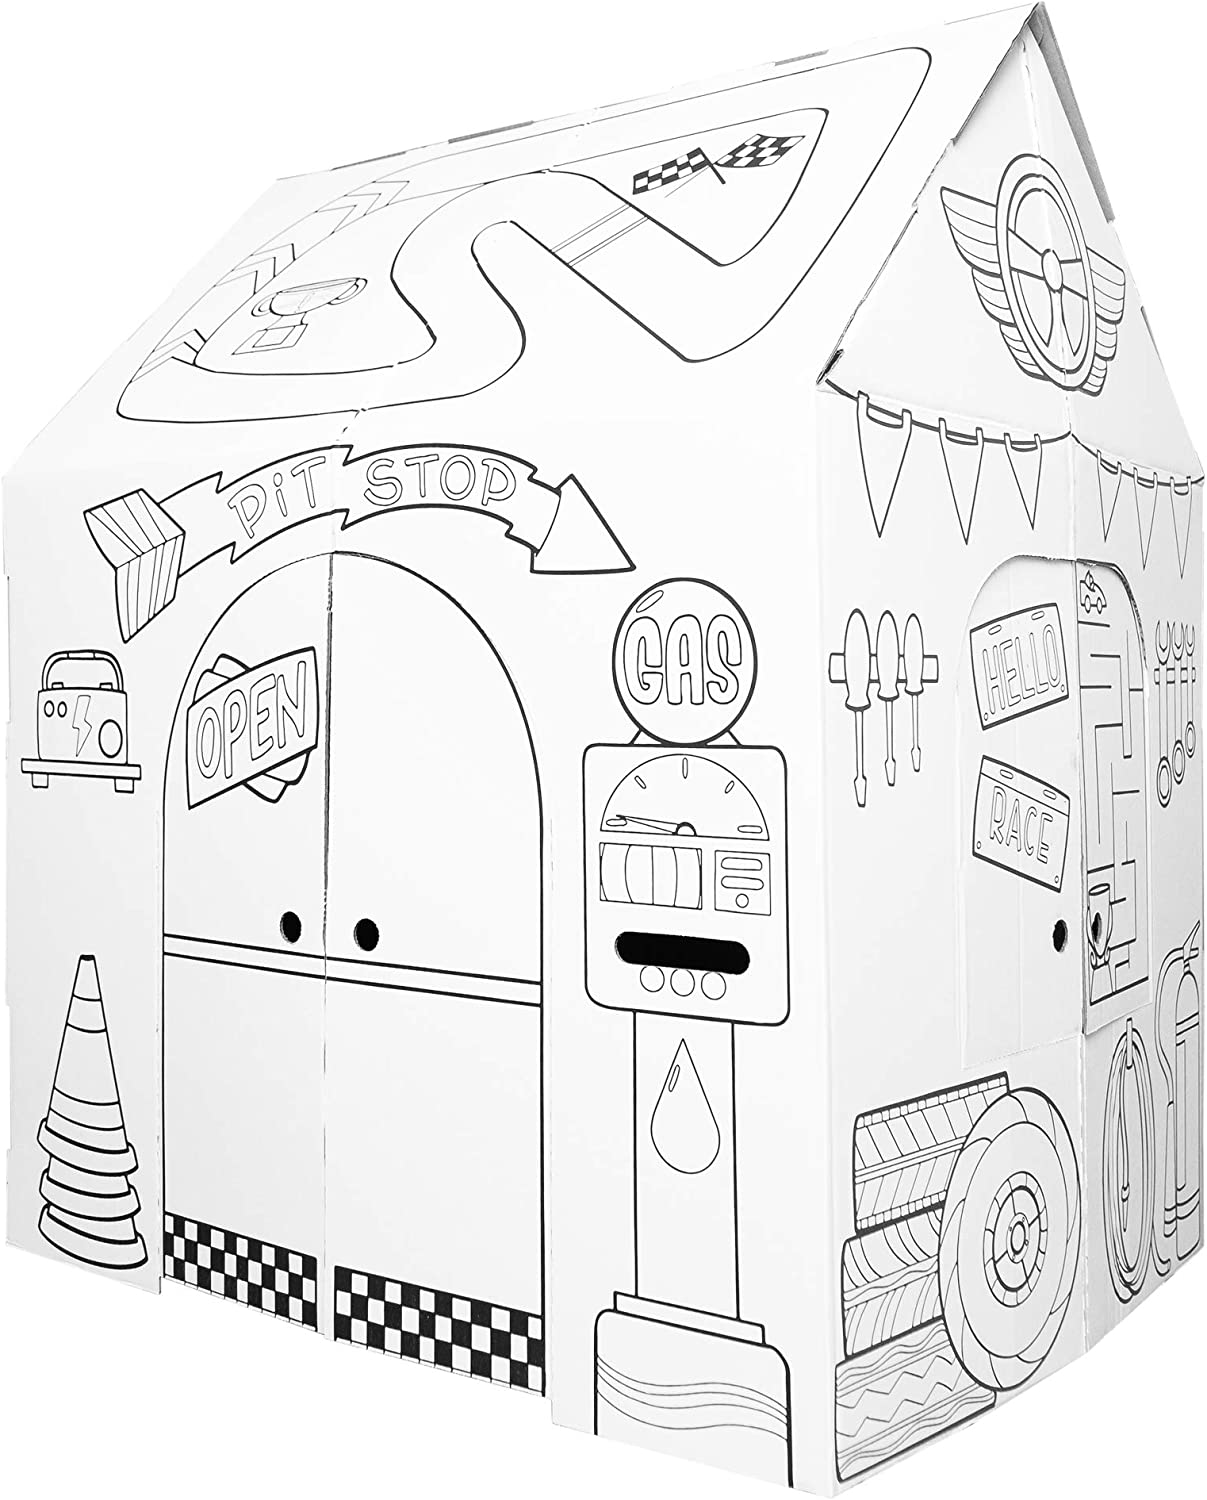 Easy Playhouse Garage - Kids Art and Craft for Indoor [...]